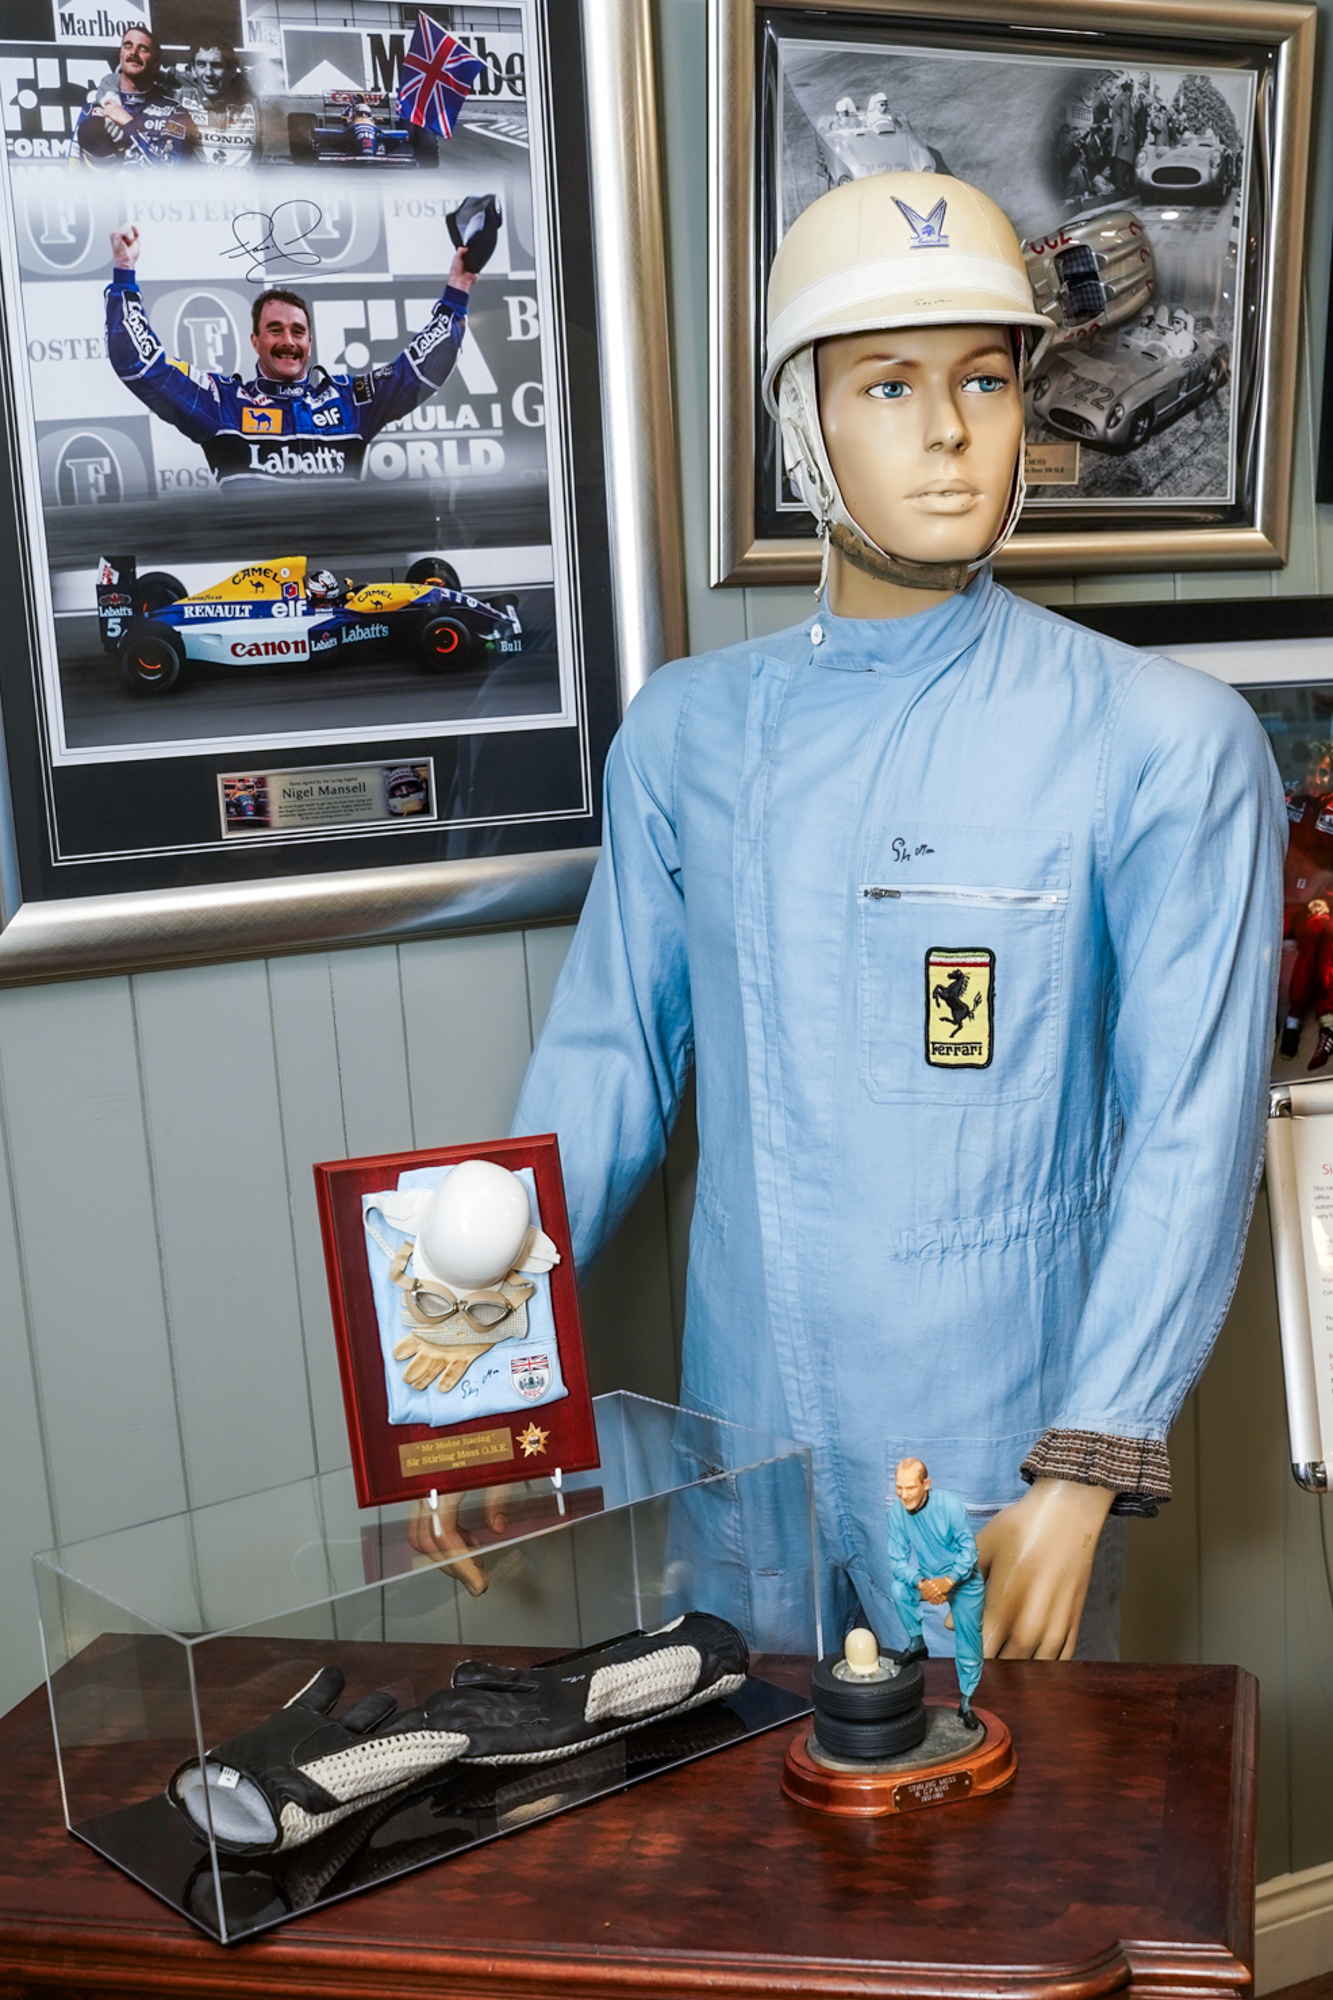 Sir Stirling Moss race suit and other items relating to the late racing driver